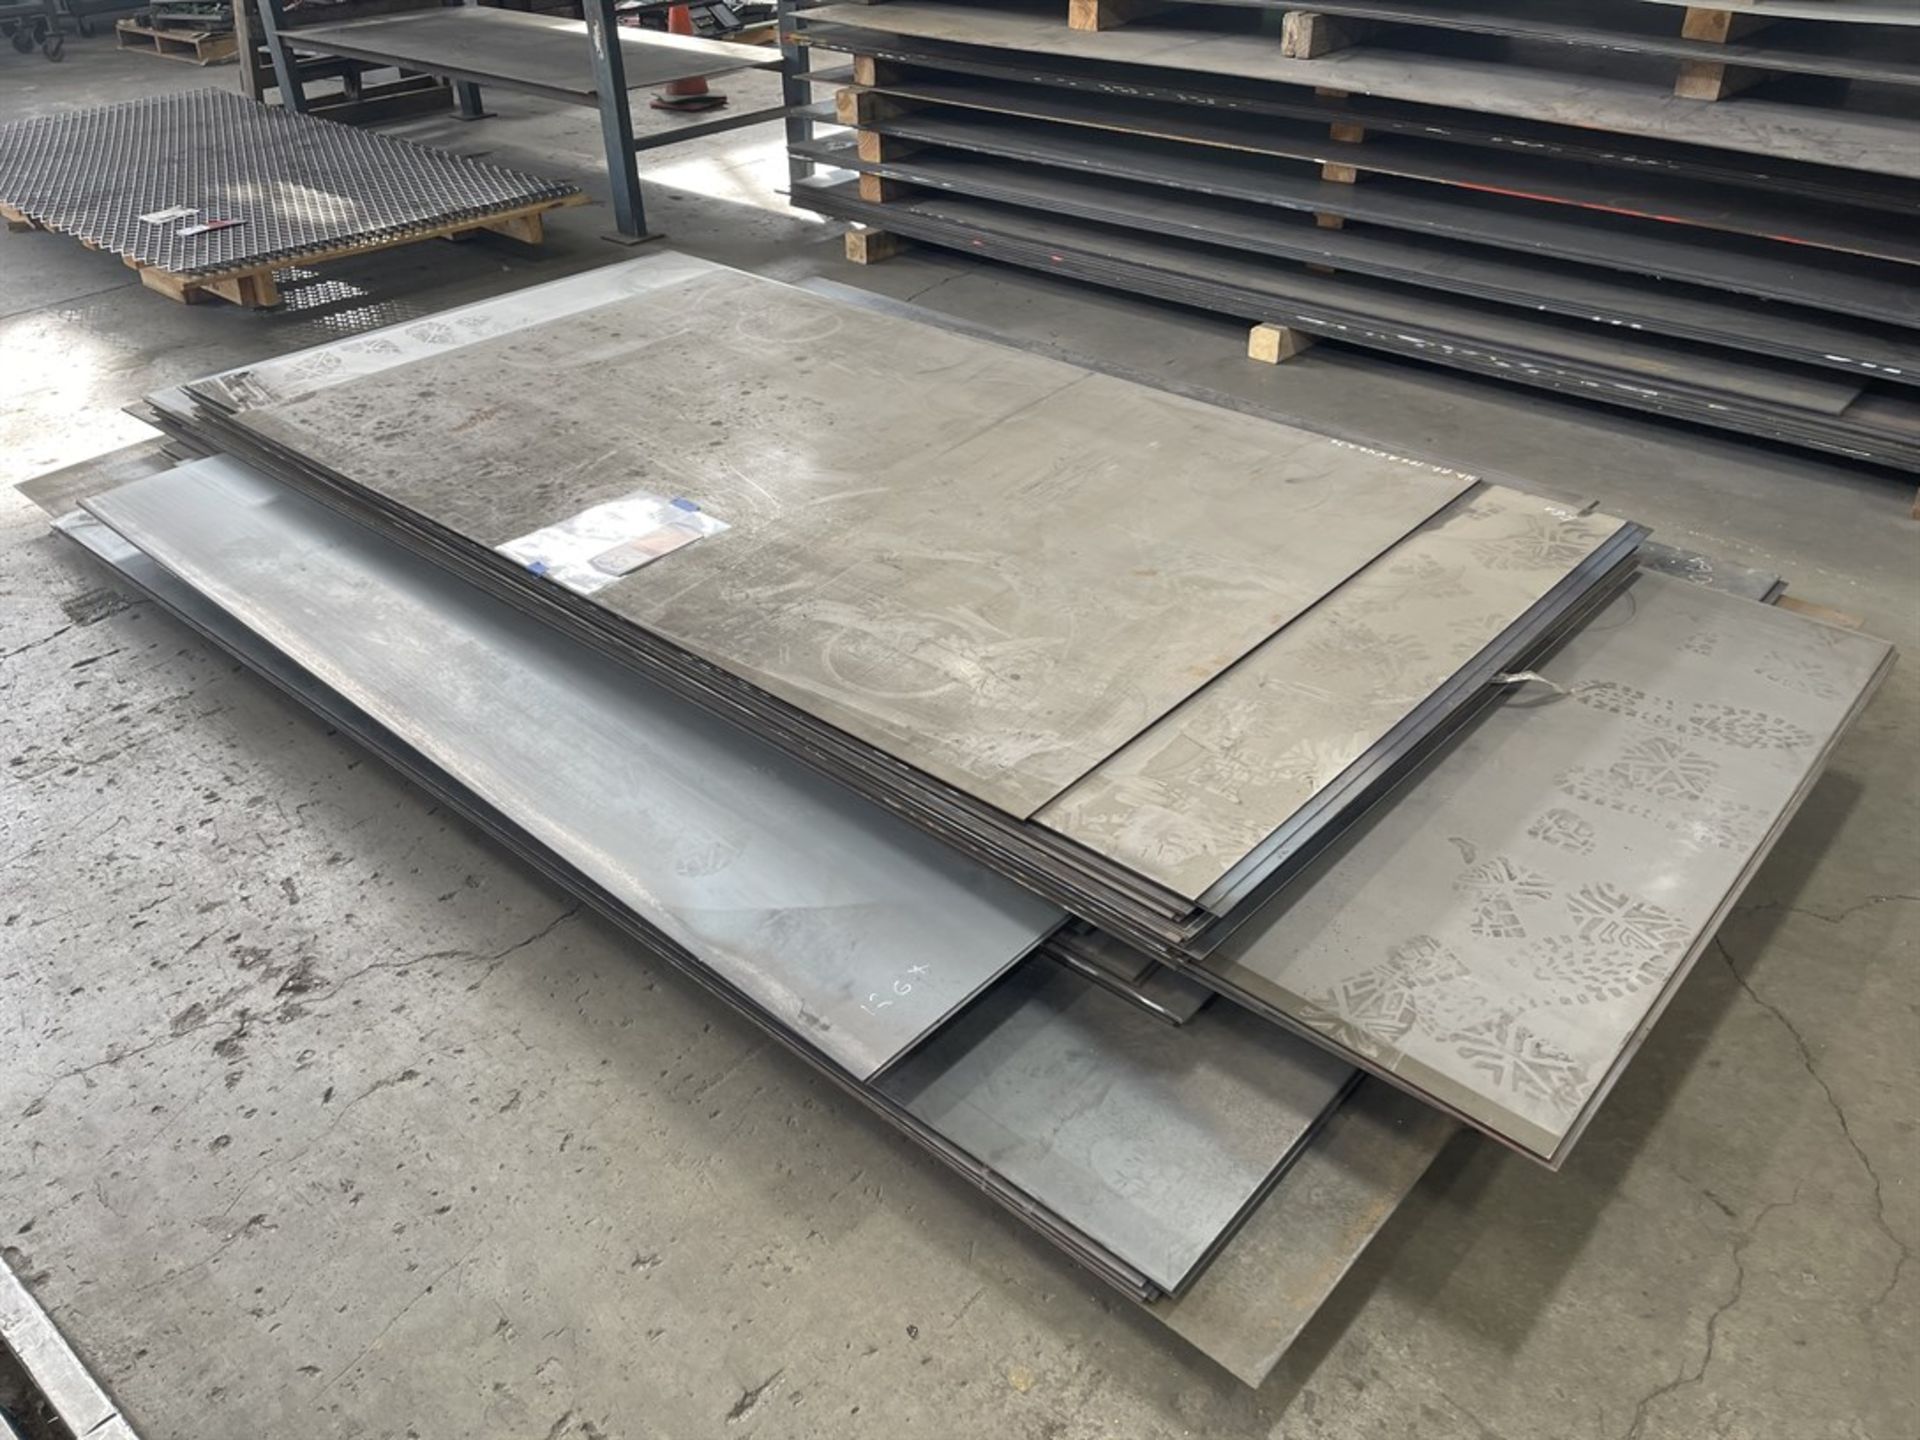 Lot of Assorted Gages of Steel Sheet Stock